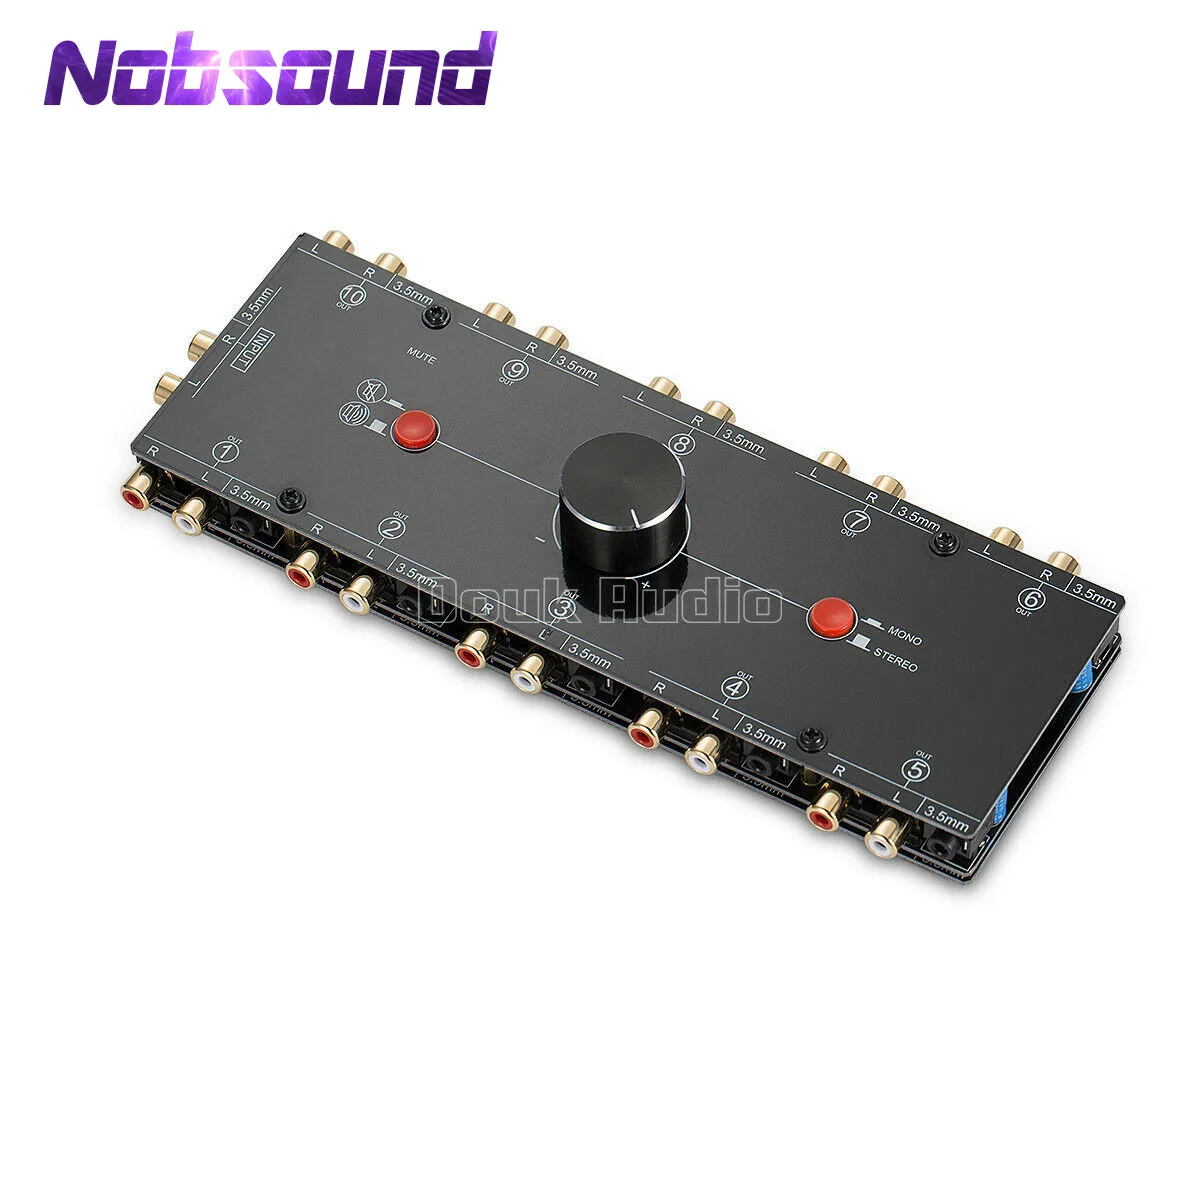 

Nobsound 1 In 10 Out 3.5mm/RCA Mono/Stereo Analog Audio Switcher Selector Splitter Preamp